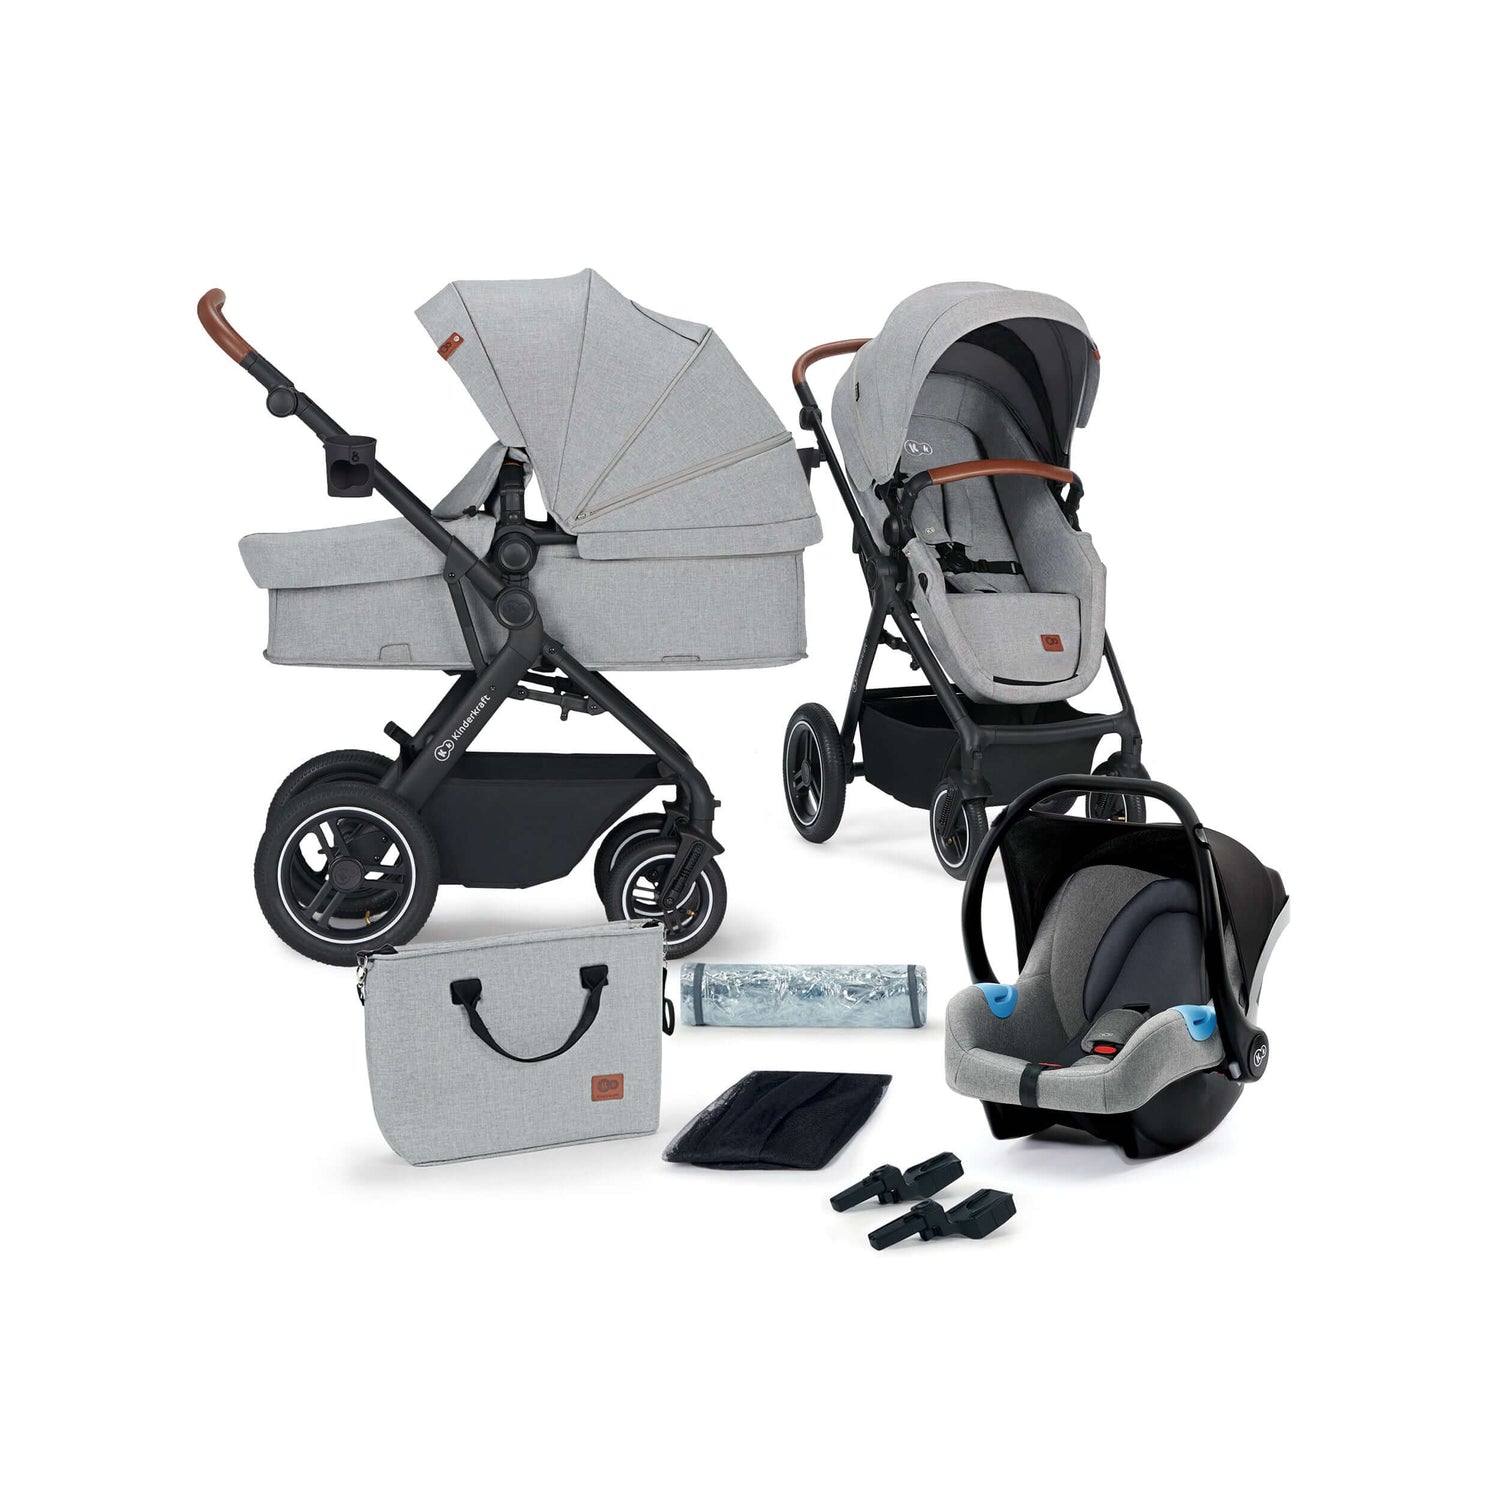 What's in the box of Kinderkraft B-Tour 3 IN 1 Travel System in Light Grey